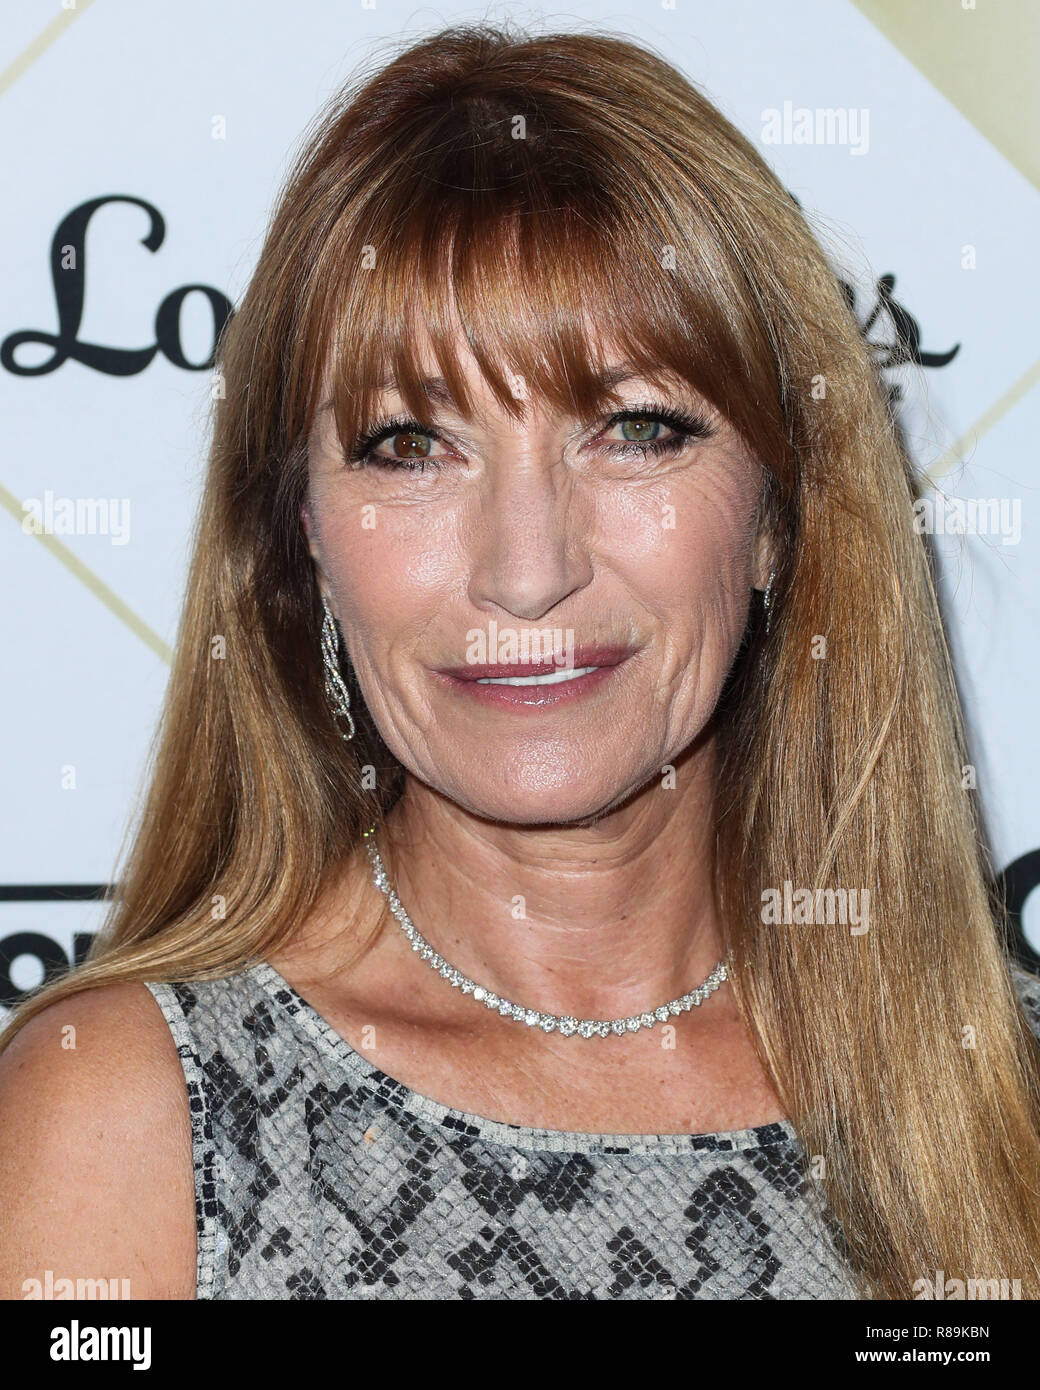 SANTA MONICA, LOS ANGELES, CA, USA - OCTOBER 25: Jane Seymour at the Los Angeles Team Mentoring’s 20th Annual Soiree held at the Fairmont Miramar Hotel on October 25, 2018 in Santa Monica, Los Angeles, California, United States. (Photo by Xavier Collin/Image Press Agency) Stock Photo